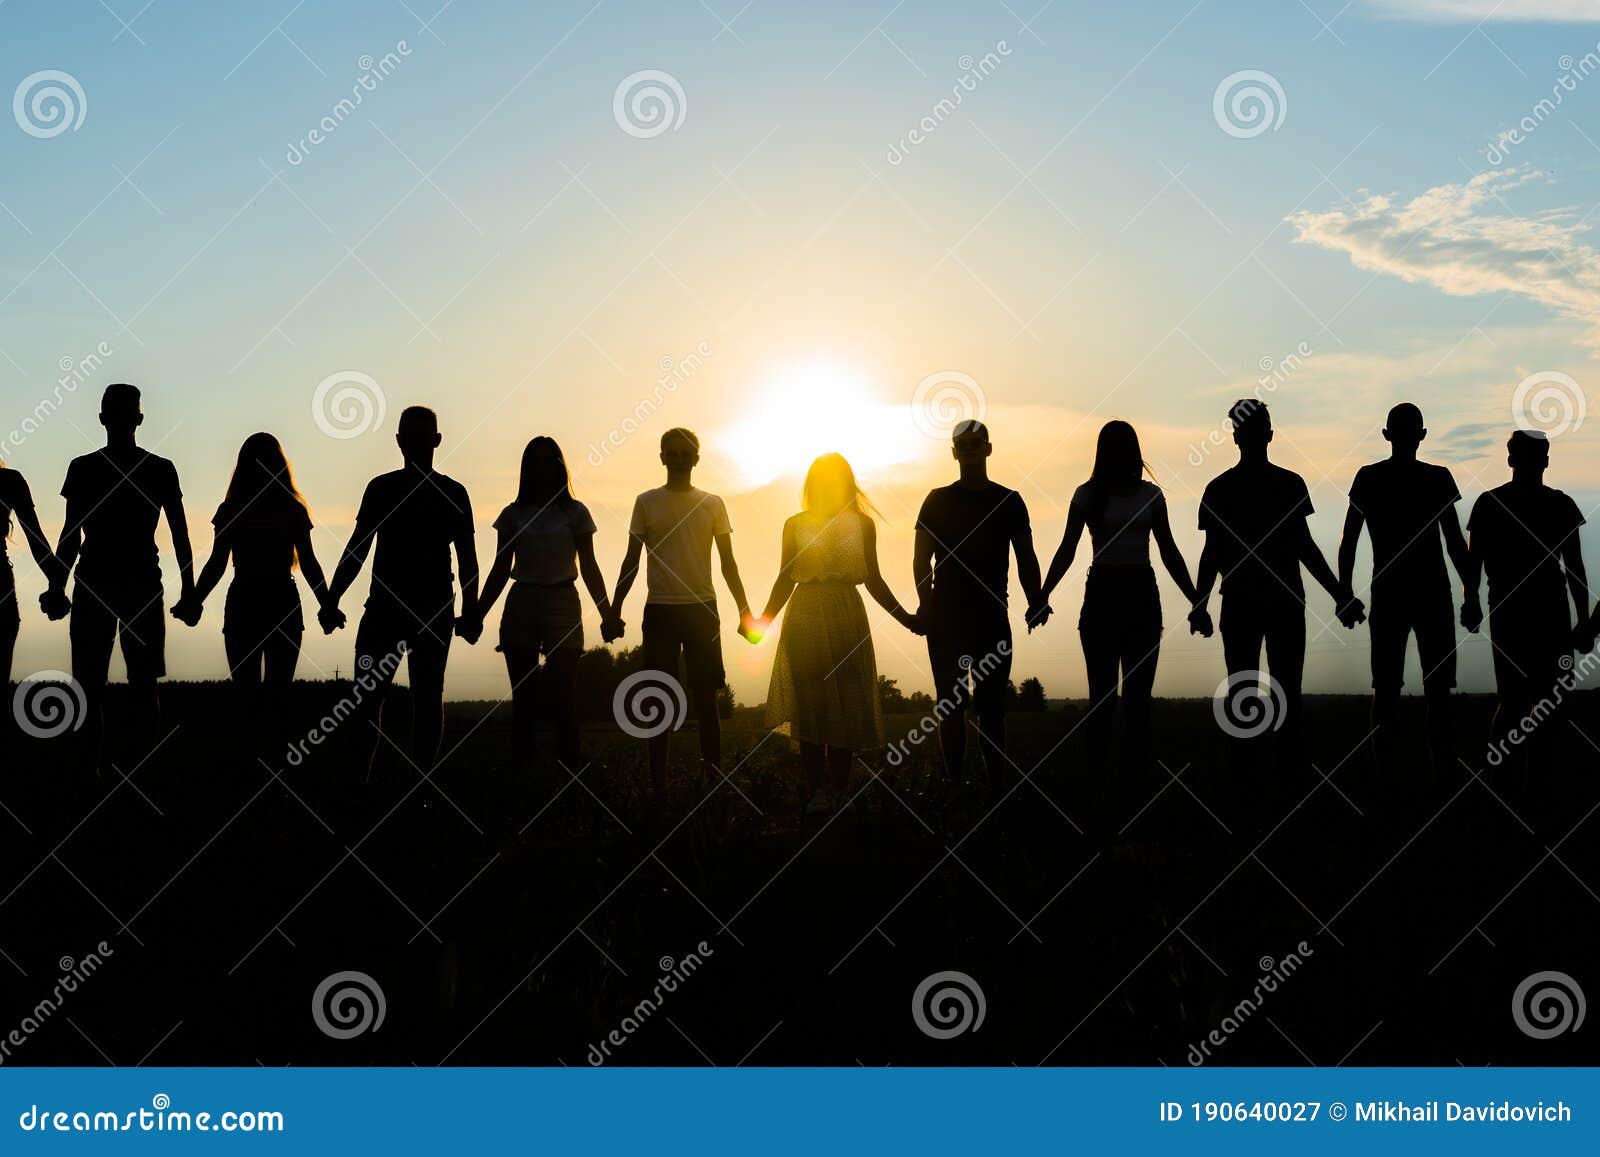 cohesion concept. black silhouettes of friends holding hands stands at sunset.